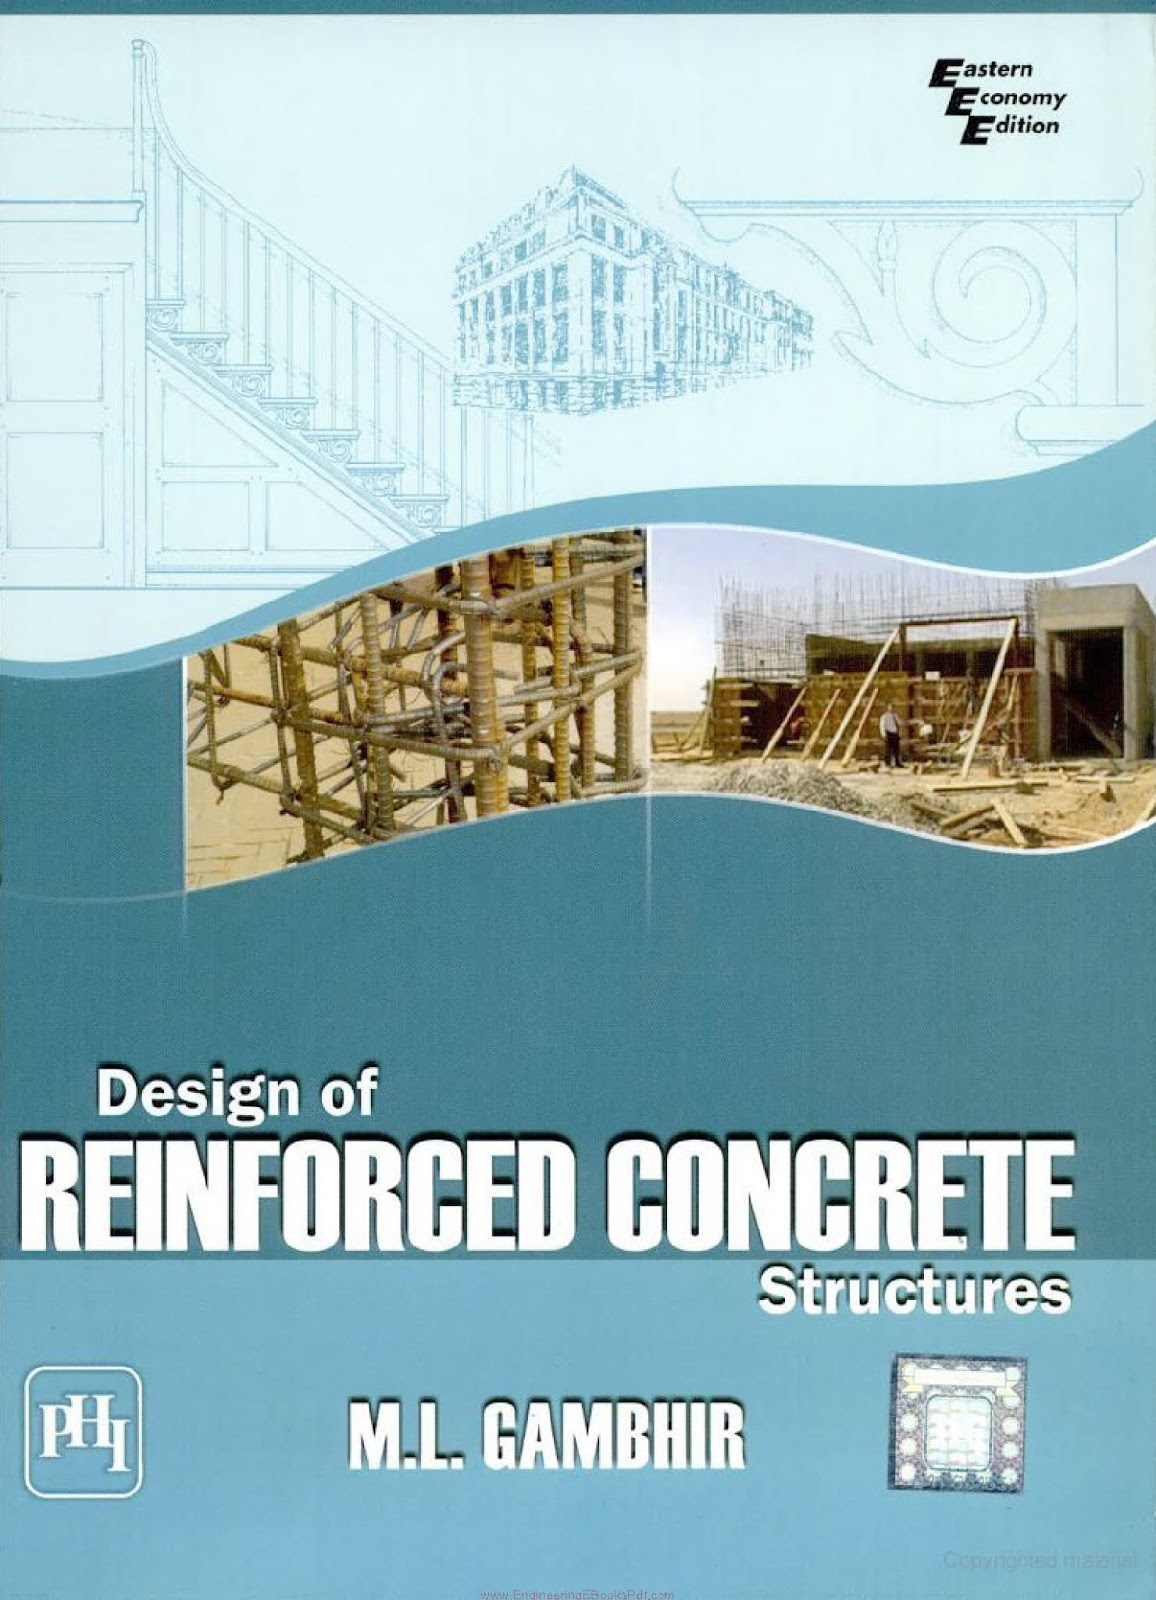 Design of Reinforced Concrete Structures By M.L Gambhir - Engineering Books